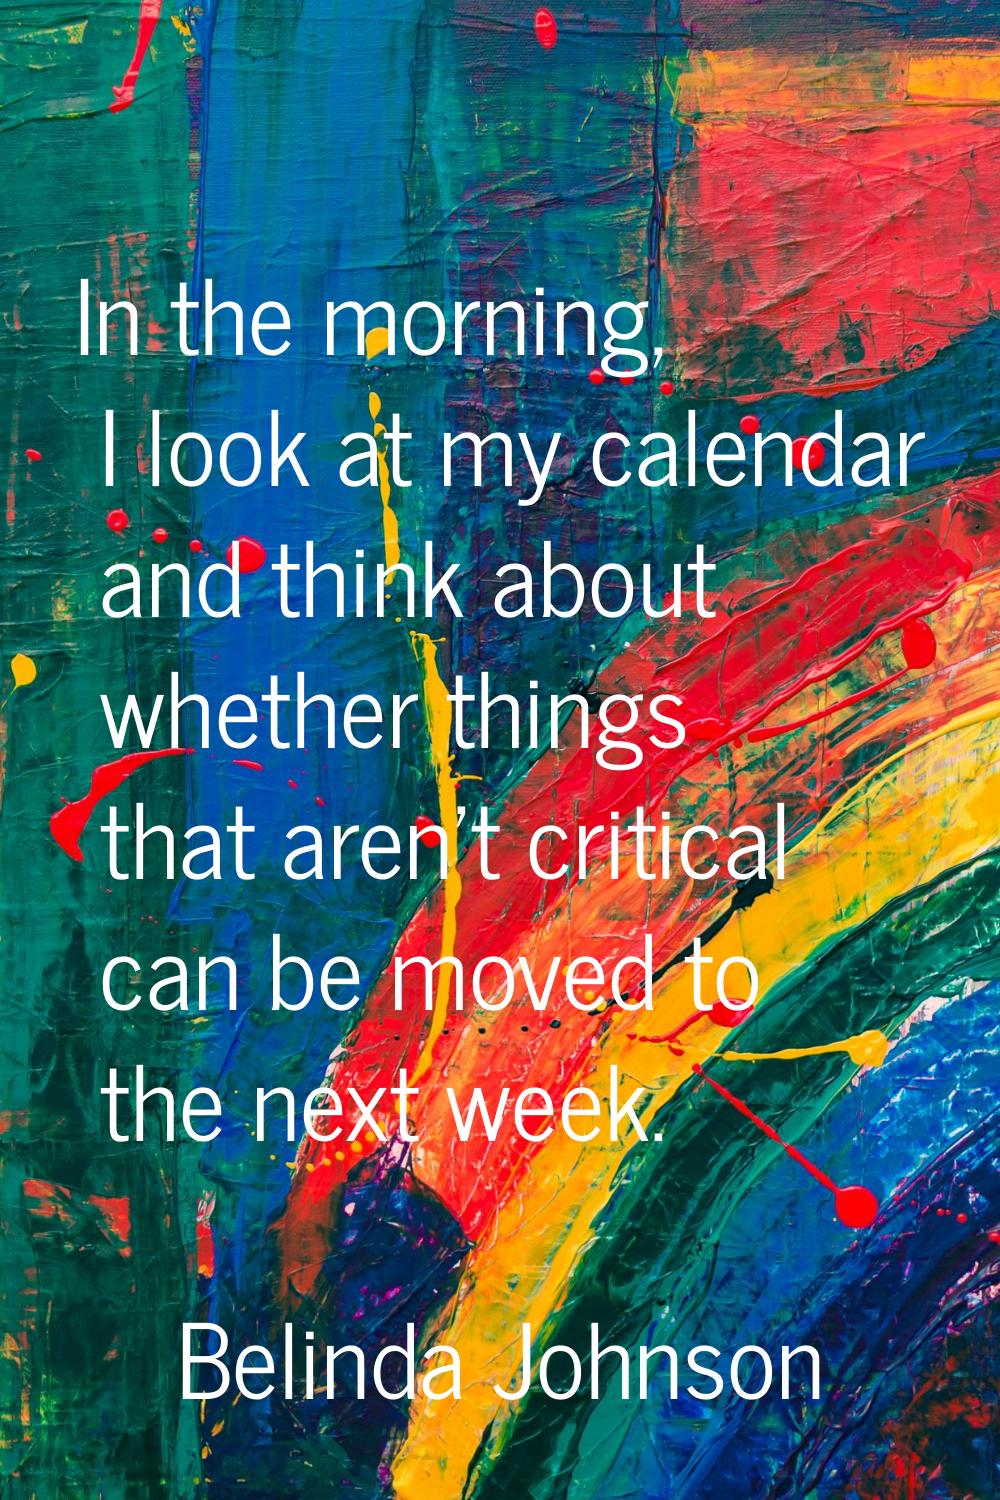 In the morning, I look at my calendar and think about whether things that aren't critical can be mo